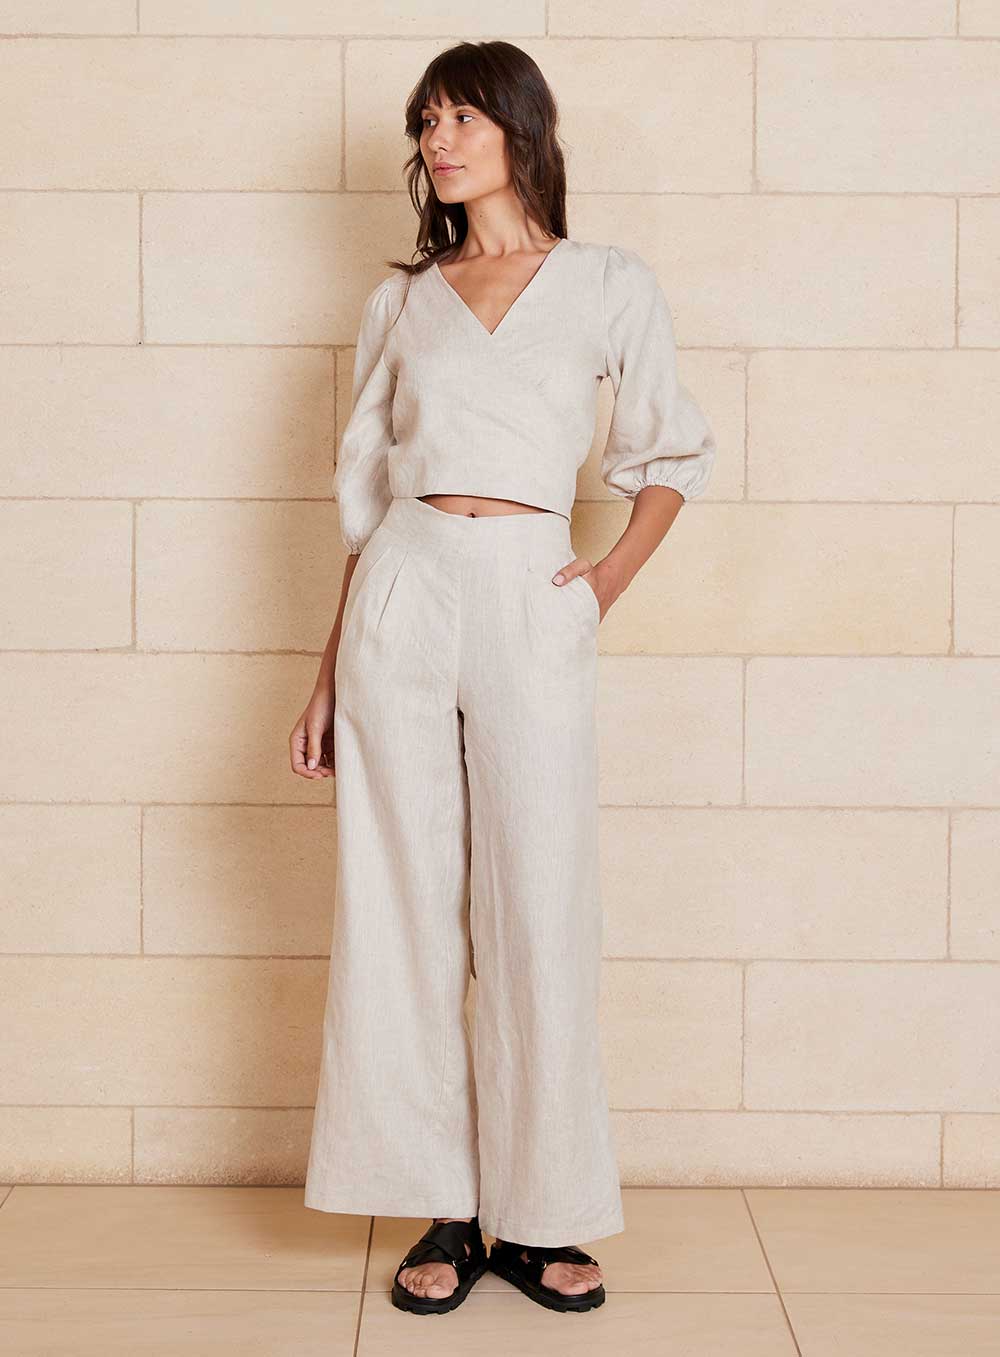 The Alice Pant in oatmeal is a full length pant made in 100% premium flax linen with 2 front pleats, 2 side pockets, belt loops and an invisible zip at the back. 